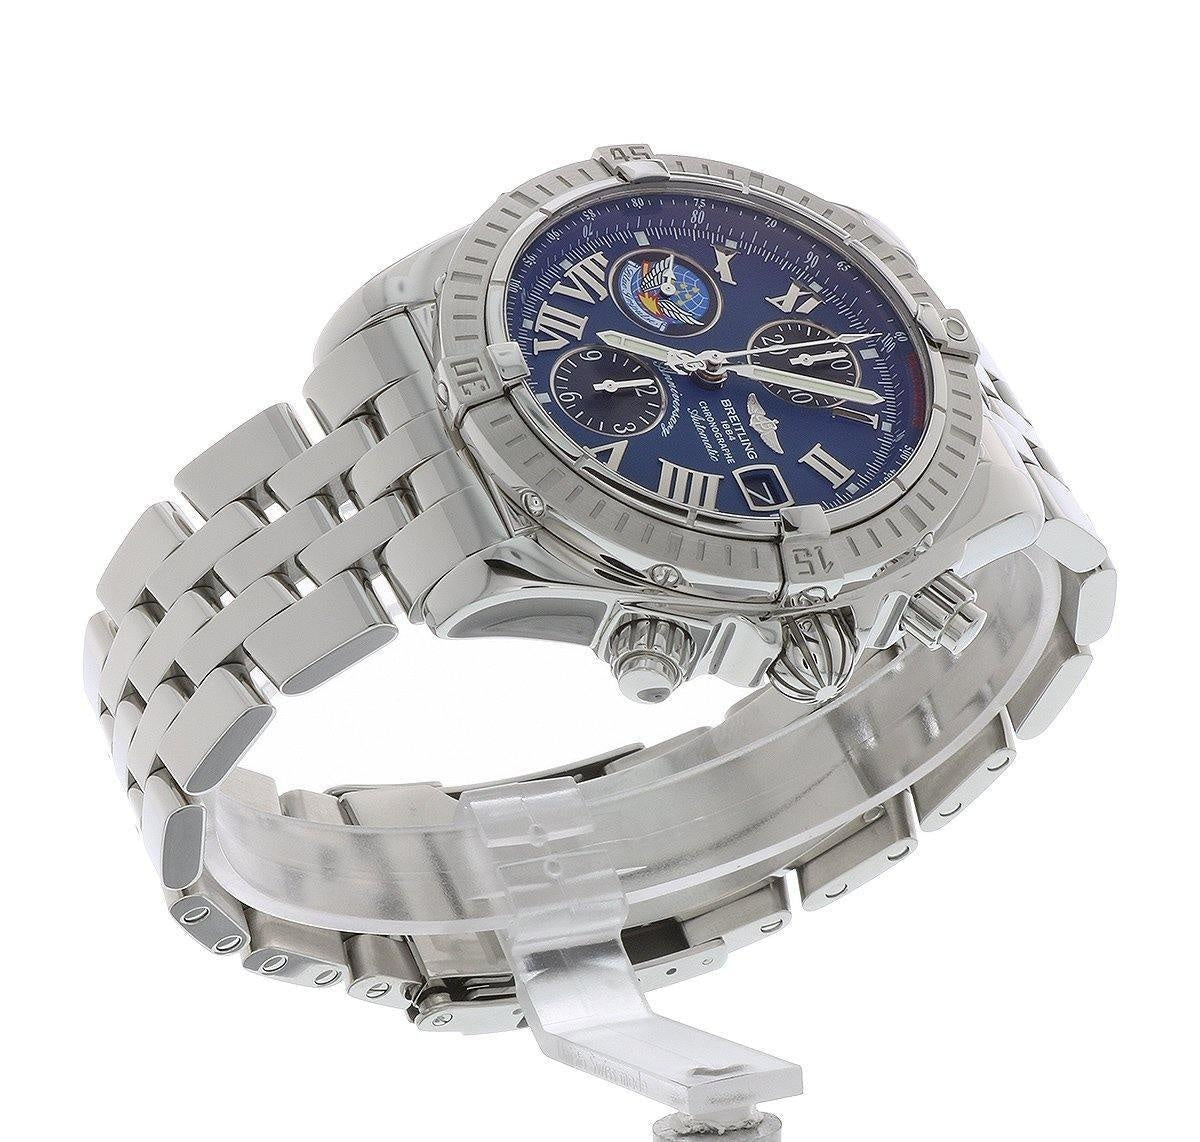 BREITLING CHRONOMAT Limited Edition 50th Anniversary 44mm Mint Condition - Swiss Watch Store UK